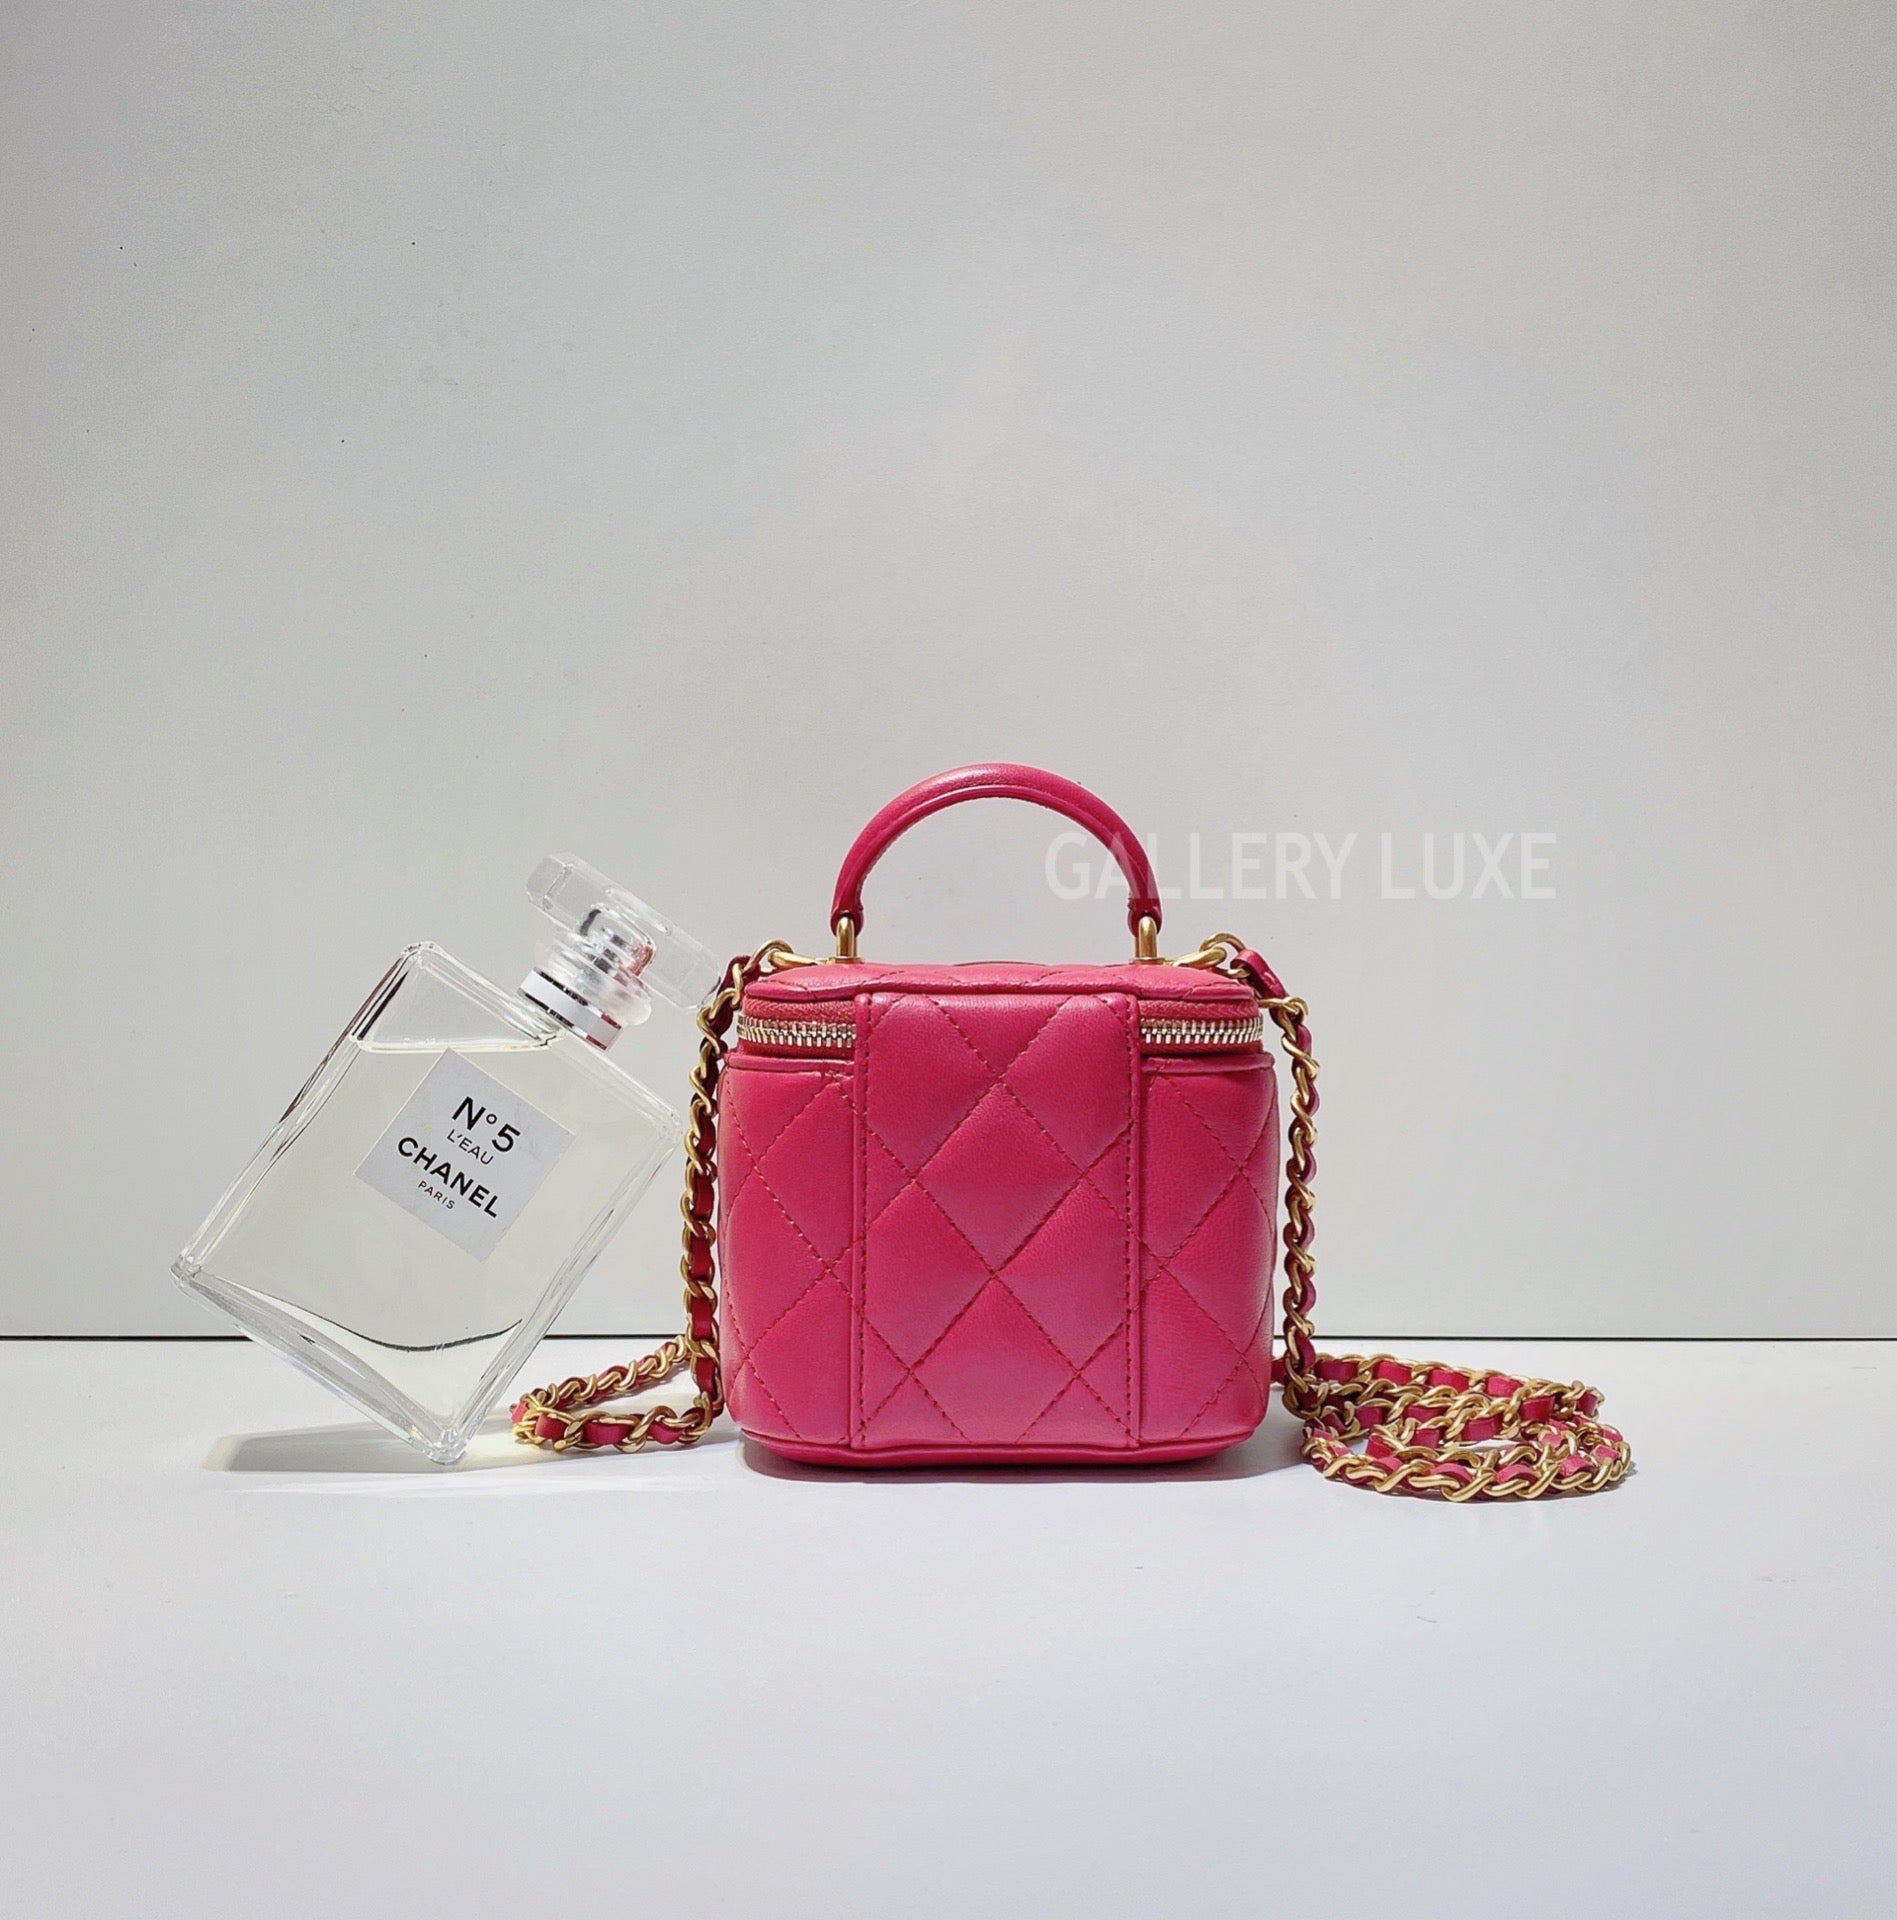 Chanel Red Quilted Lambskin Leather Pearl Crush Small Vanity Case